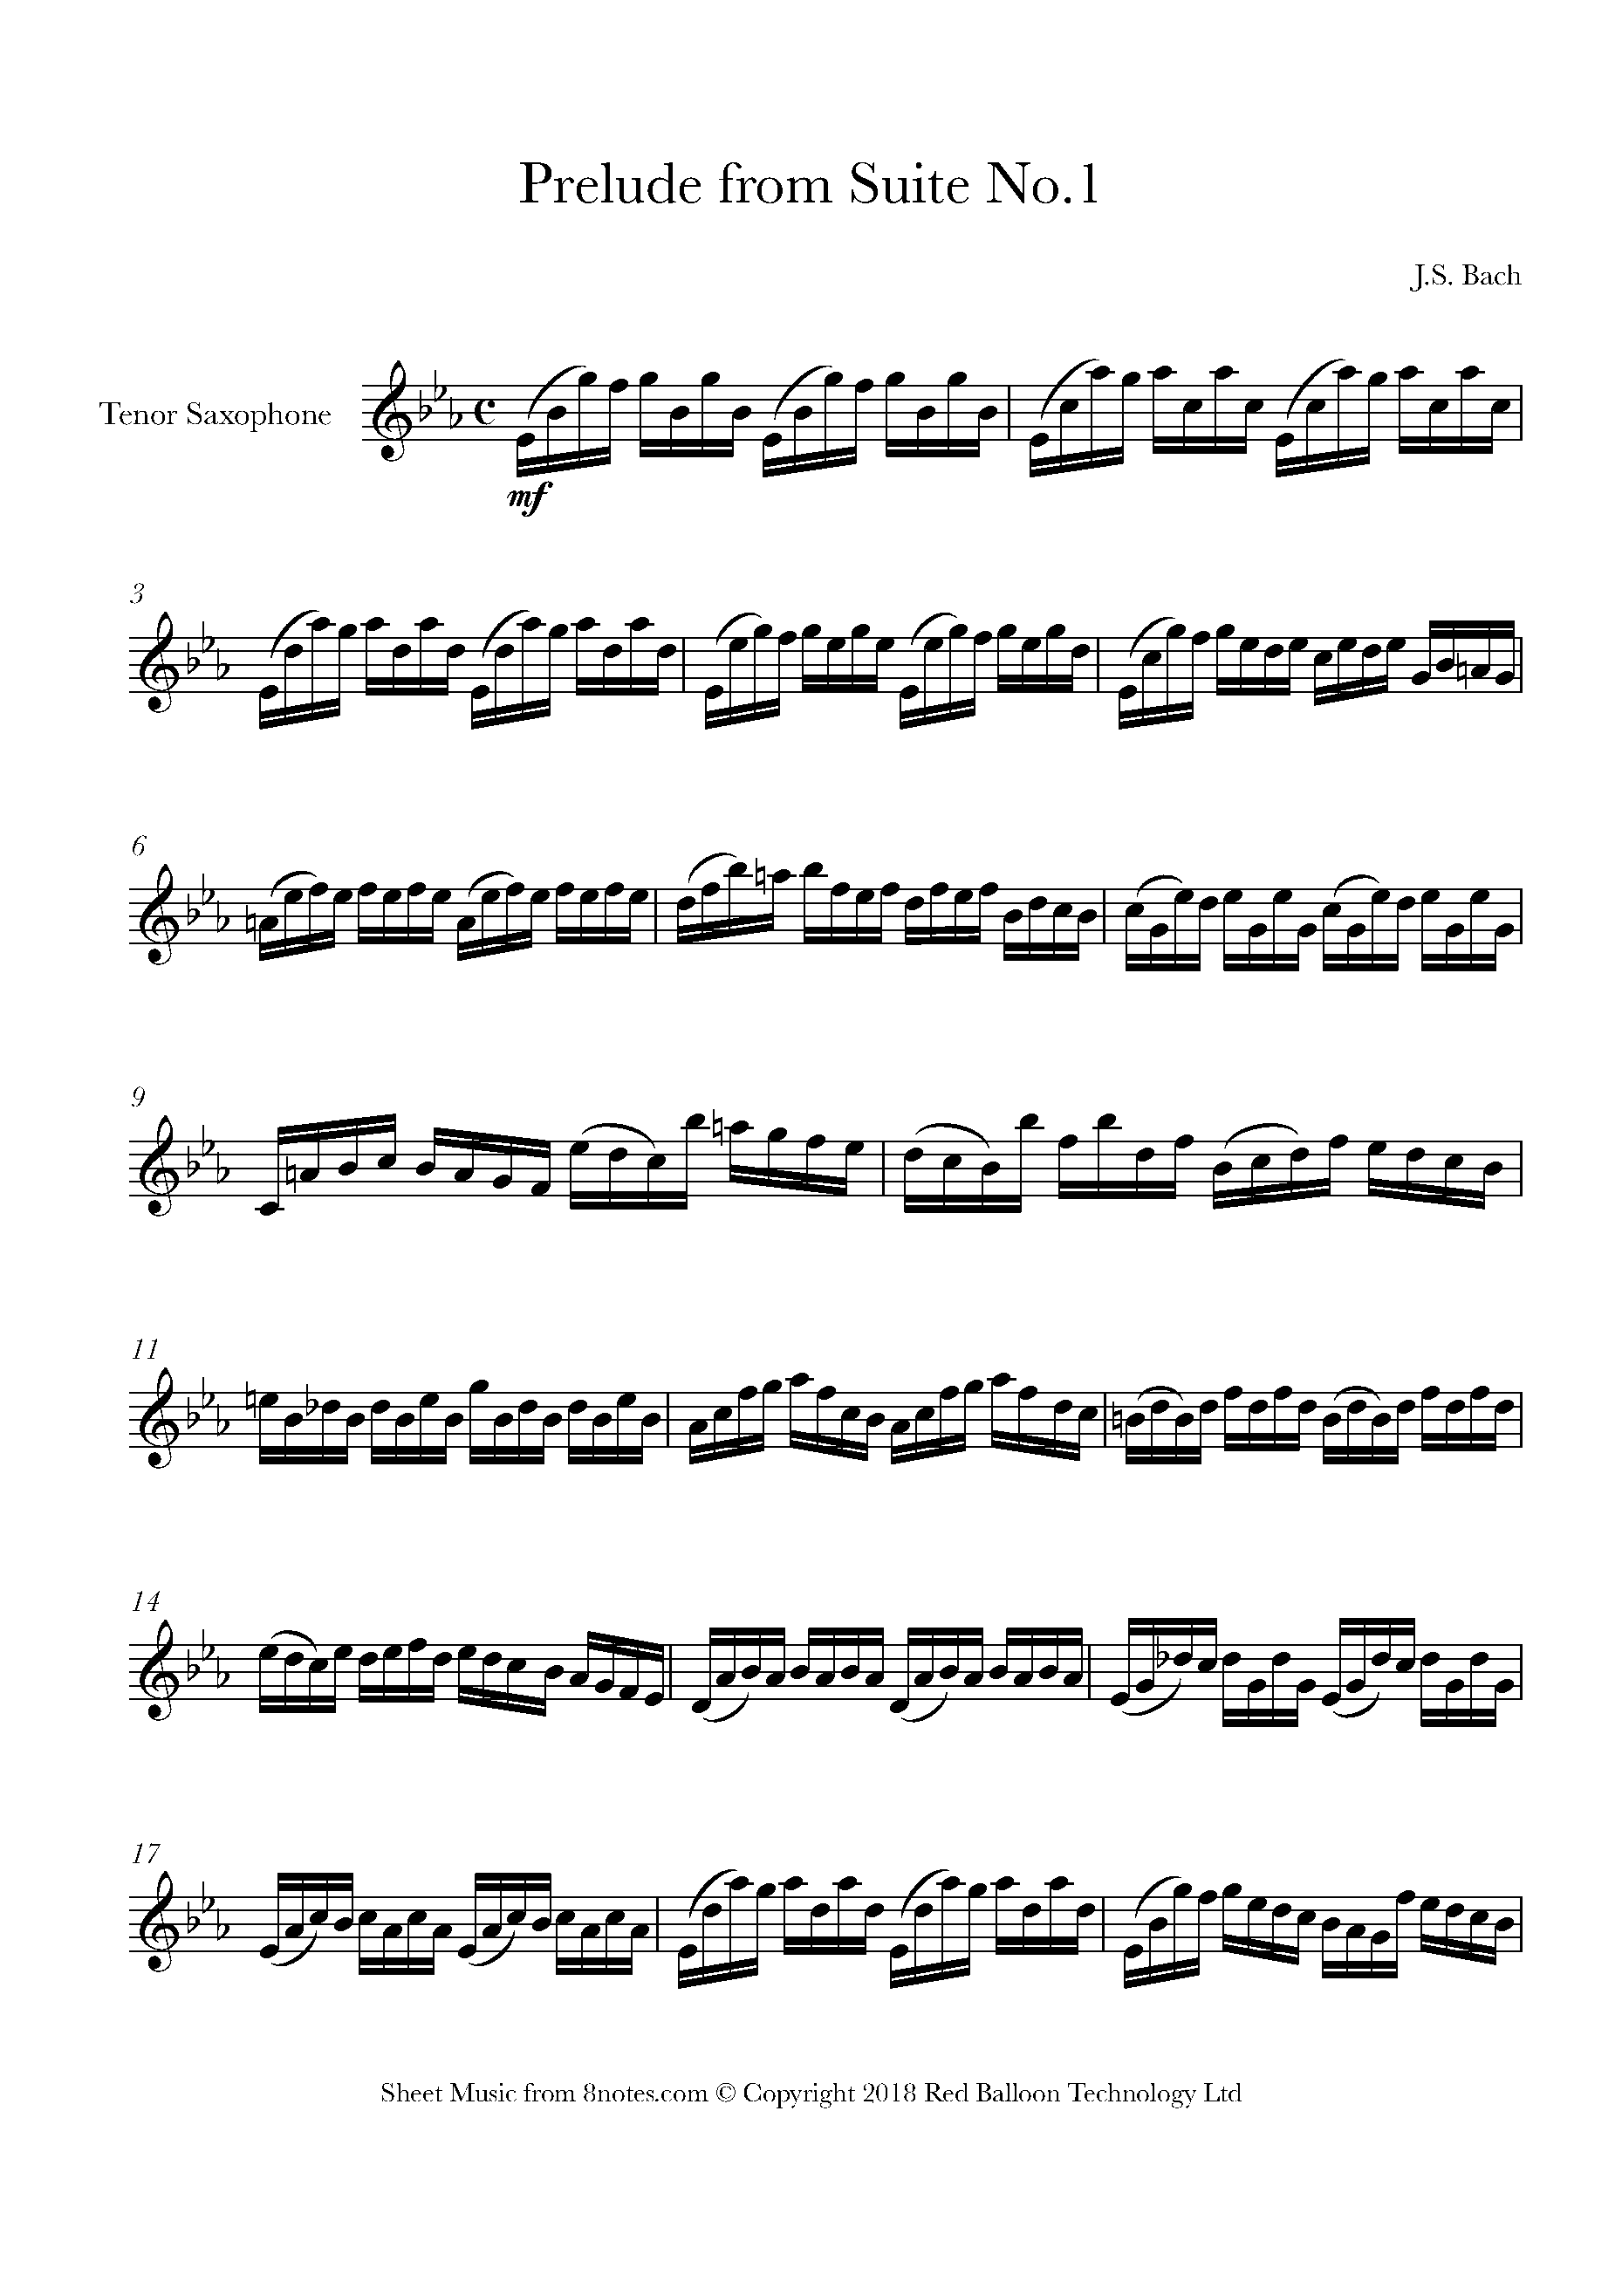 Bach - Prelude from Cello Suite No.1 Sheet music for Tenor Saxophone